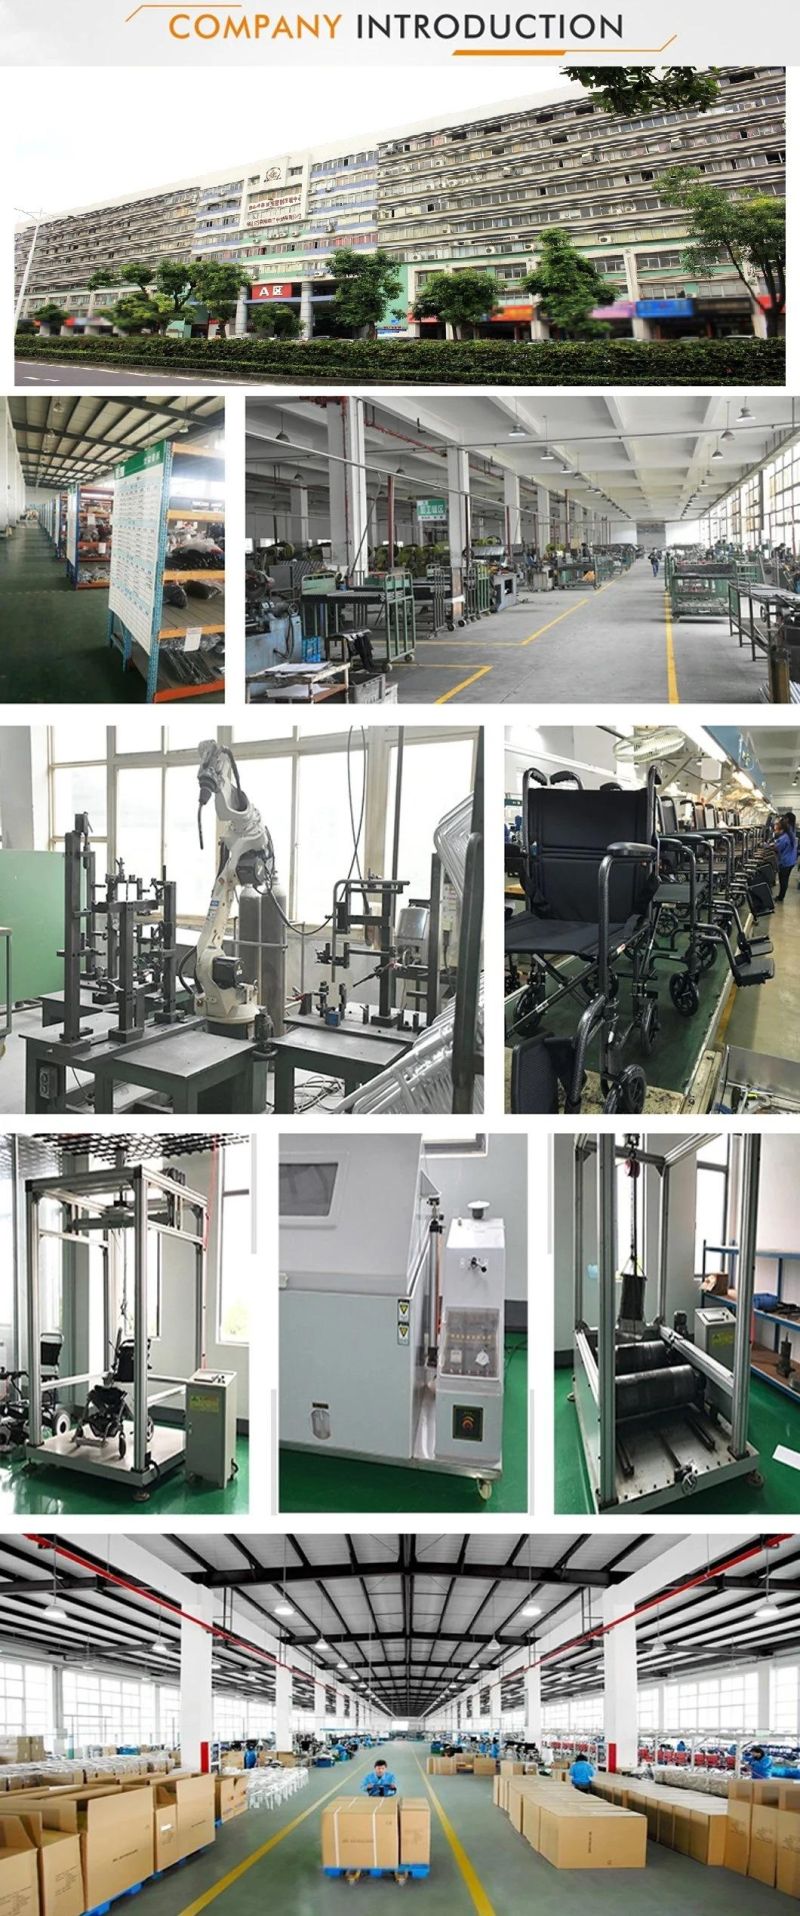 Medical Equipment Apparatus Steel Aluminum Alloy Folding Electric Toilet OEM Customized Manual Disabled Light Elderly Accessibilitymotion Factory or Wheelchair